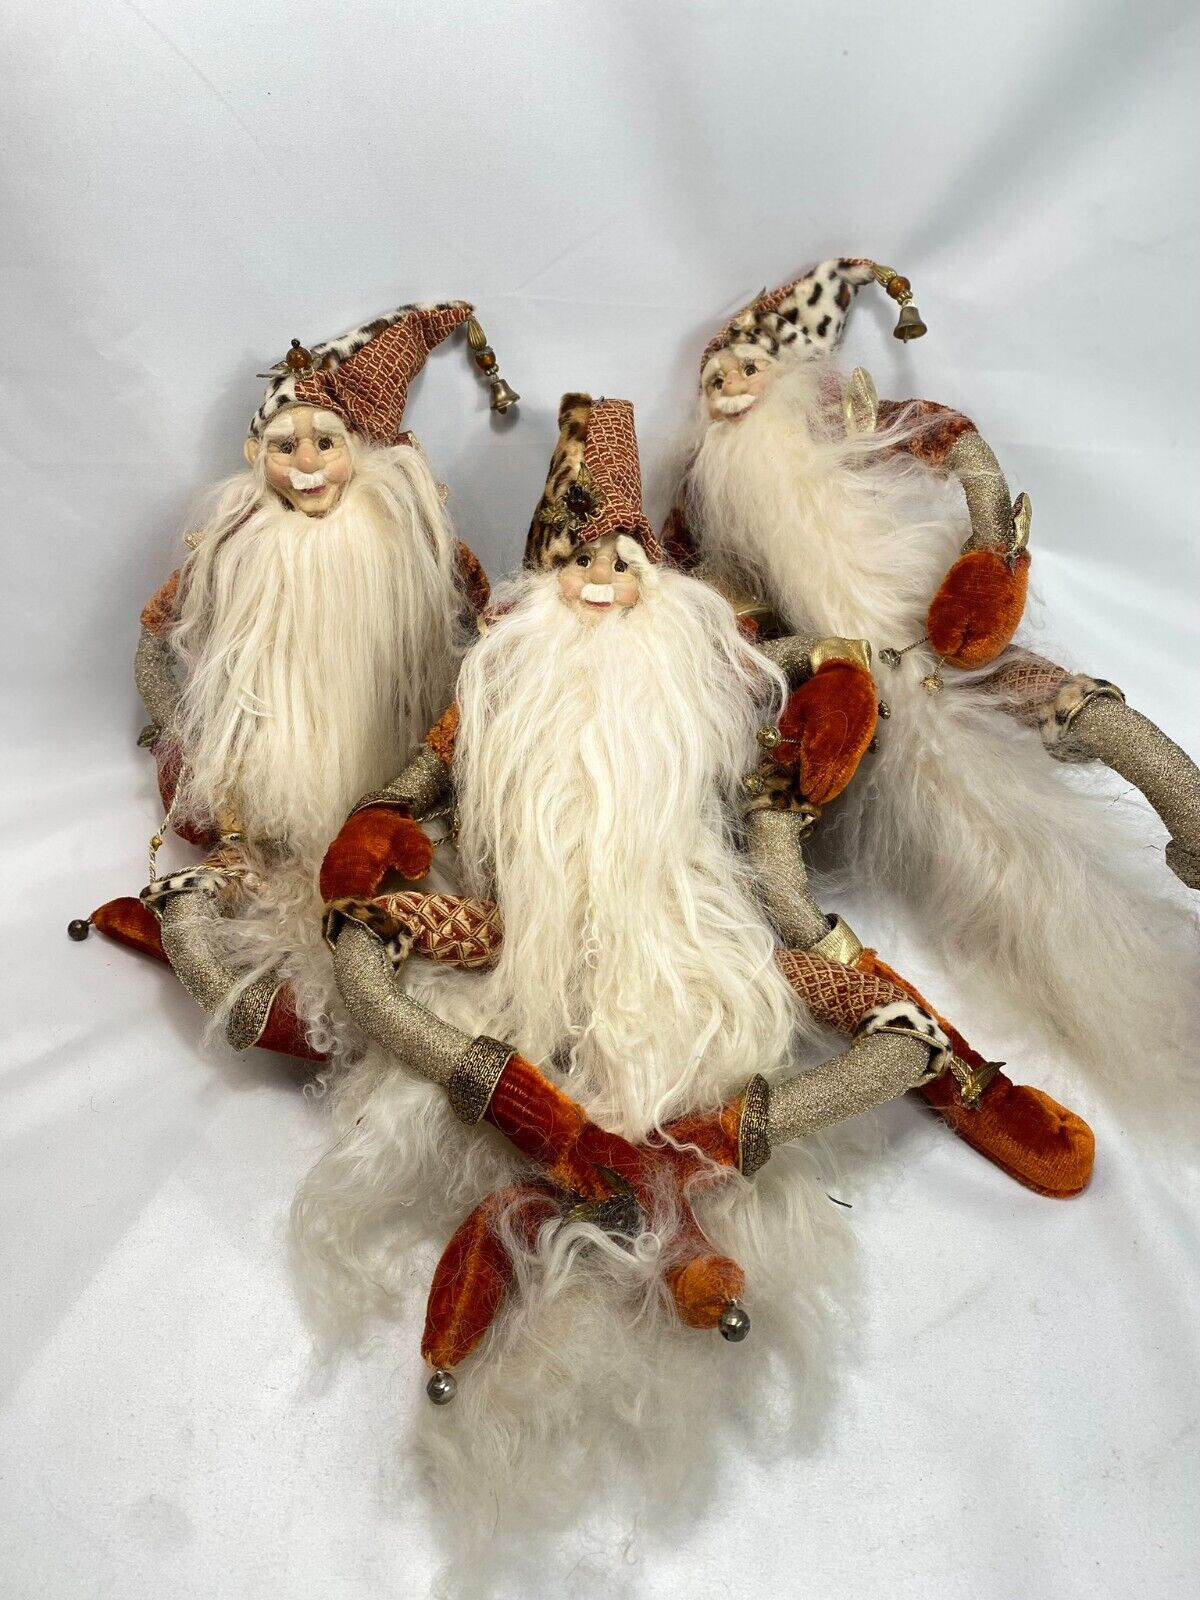 Lot of 3 Handmade Crafted Wizards, Christmas Style, White Beards with Hats